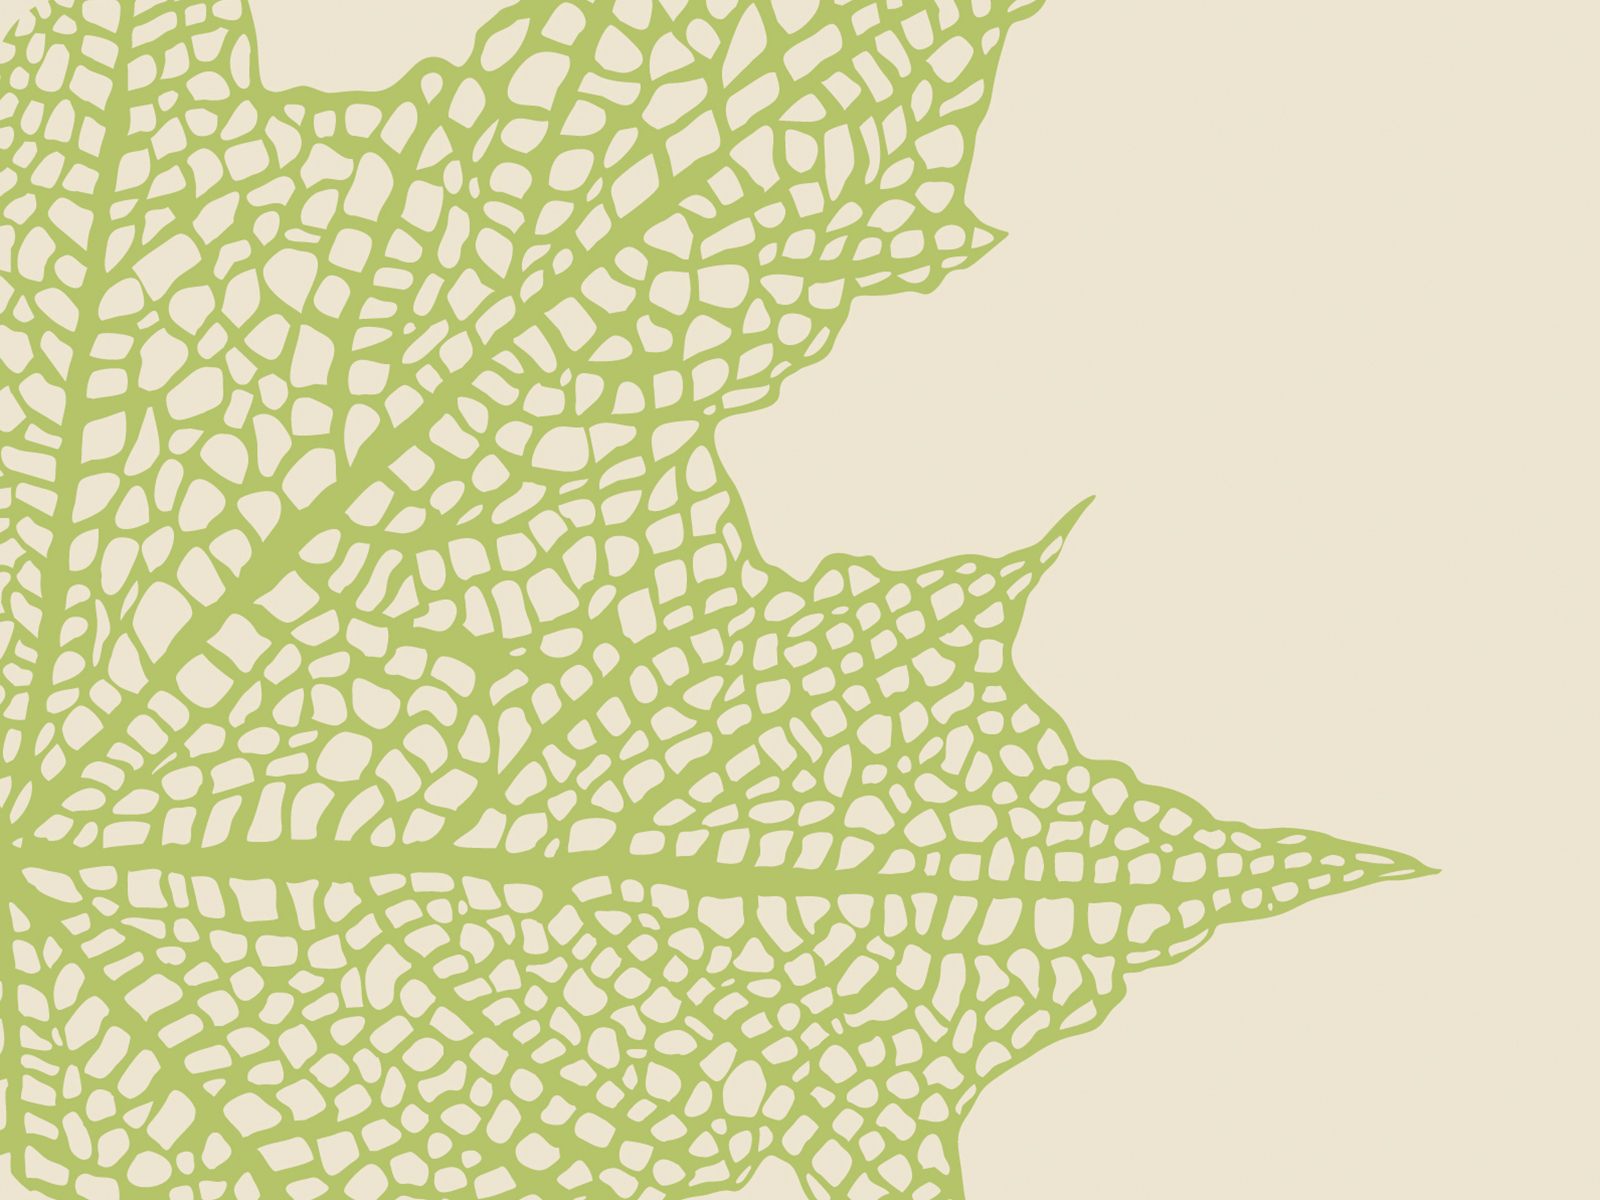 Abstract Leaf Powerpoint Templates - Green, Nature - Free PPT Backgrounds  and Templates